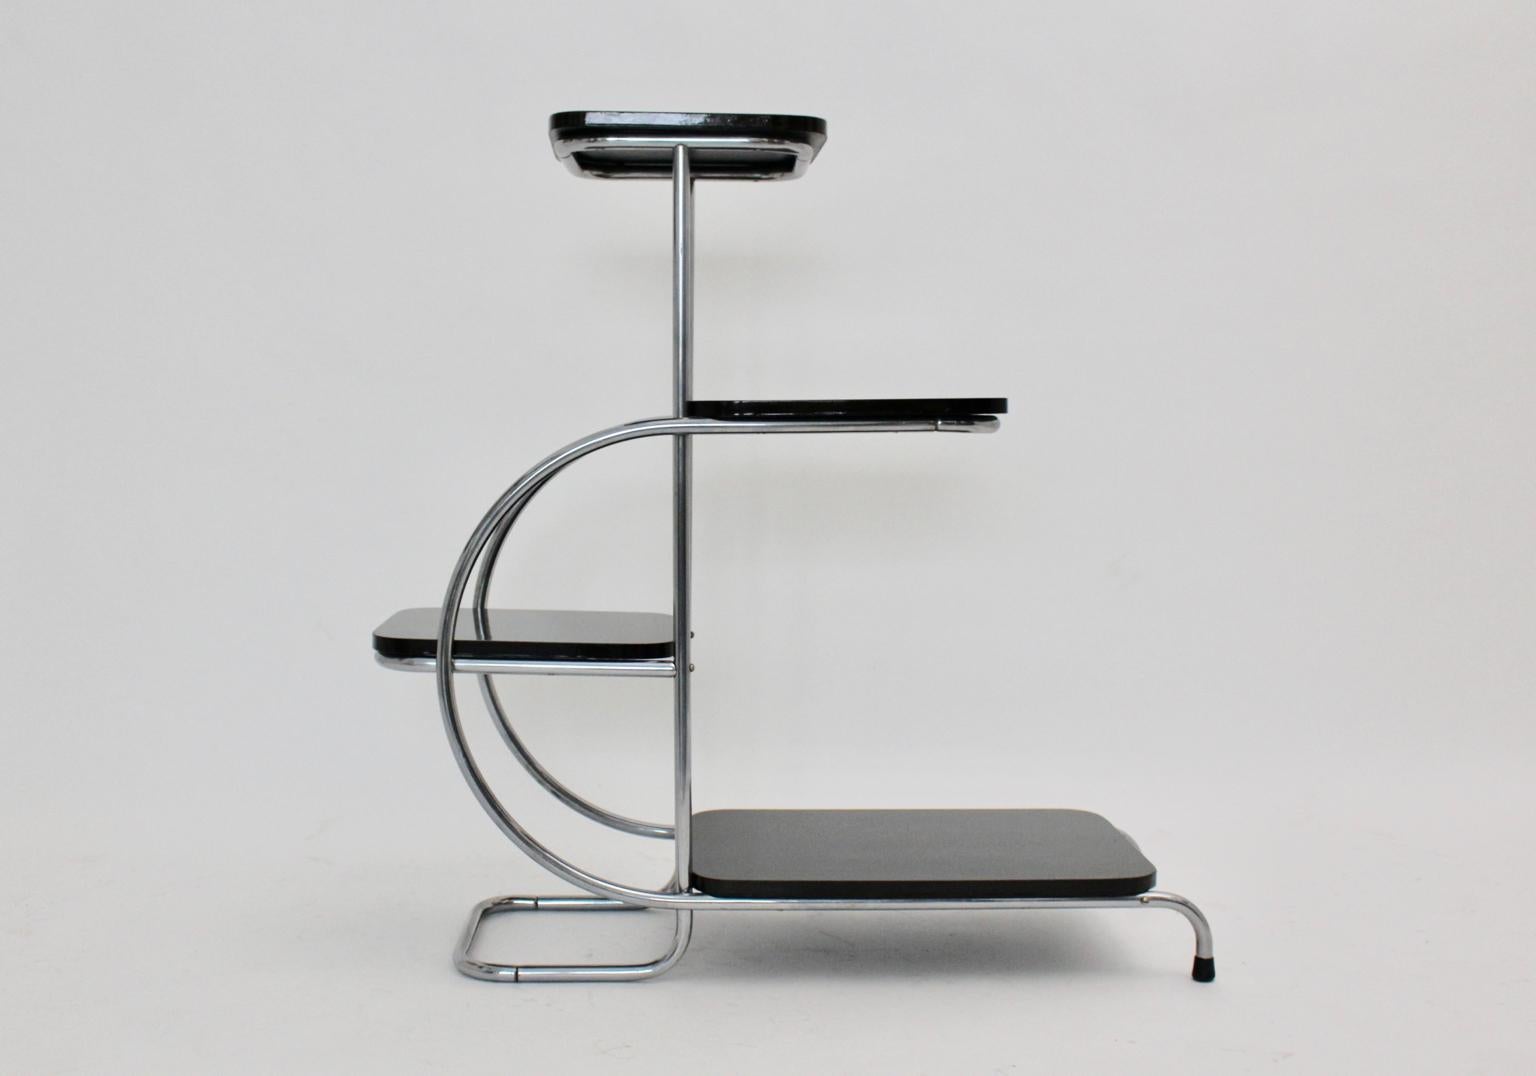 This curved side table or flower stand by Emile Guyot 1930s France, was made of chromed tube steel and black lacquered wooden plates. Also the side table shows two black rubber sabots.
This table is also well suited as a room divider.
Very good